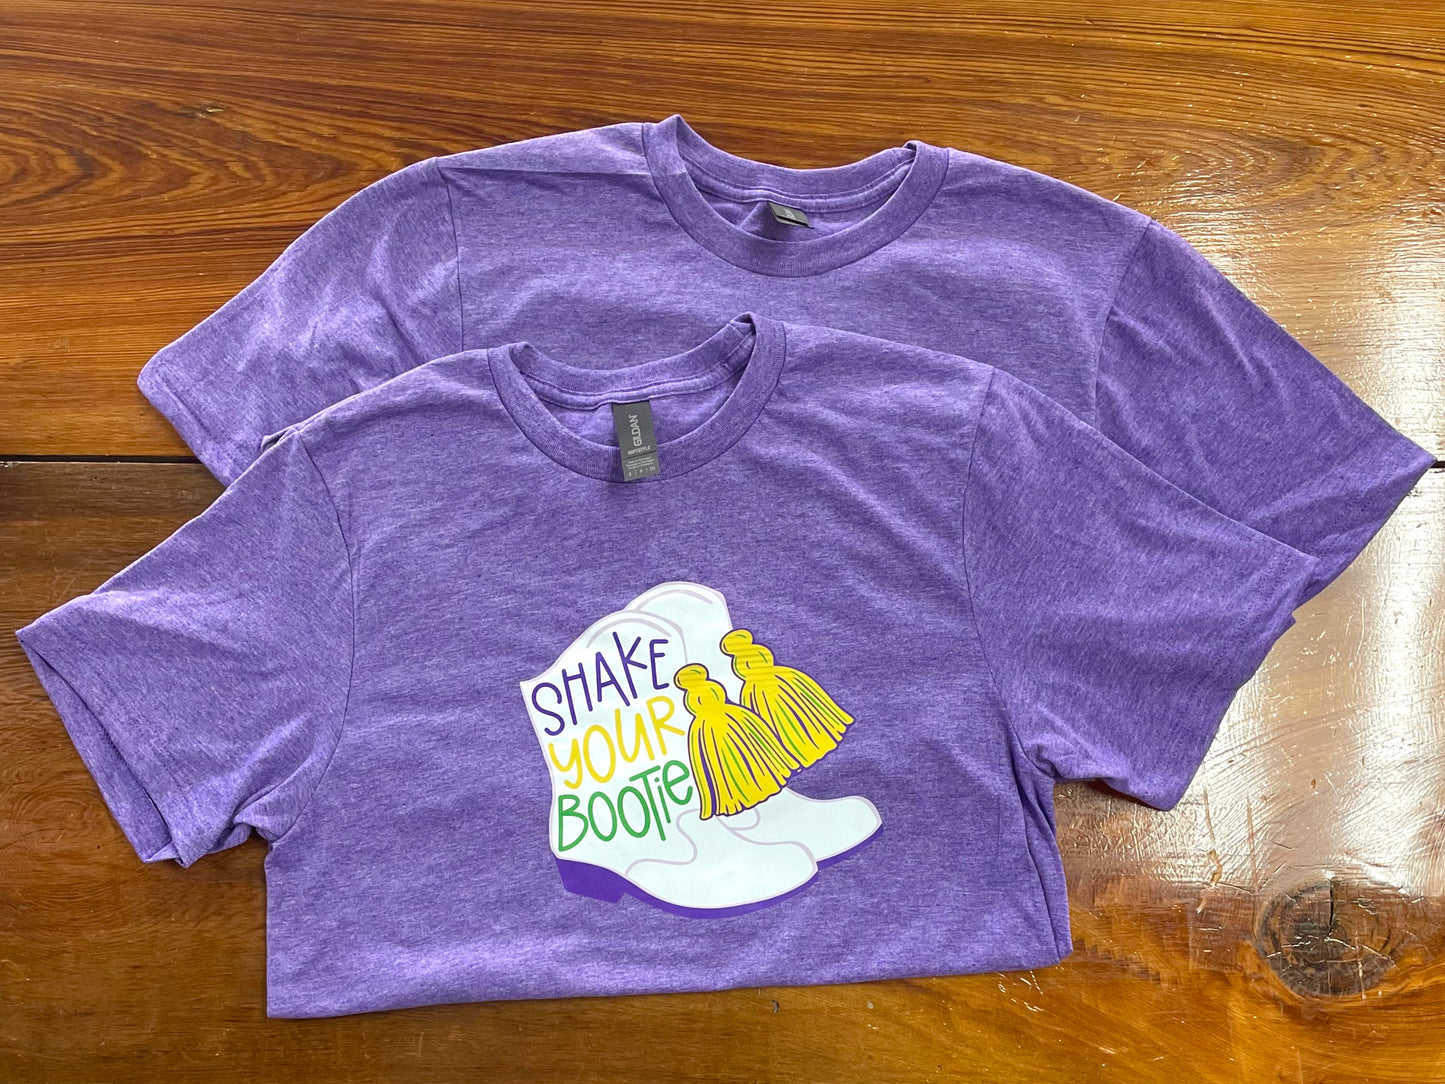 Shake your bootie T-shirt